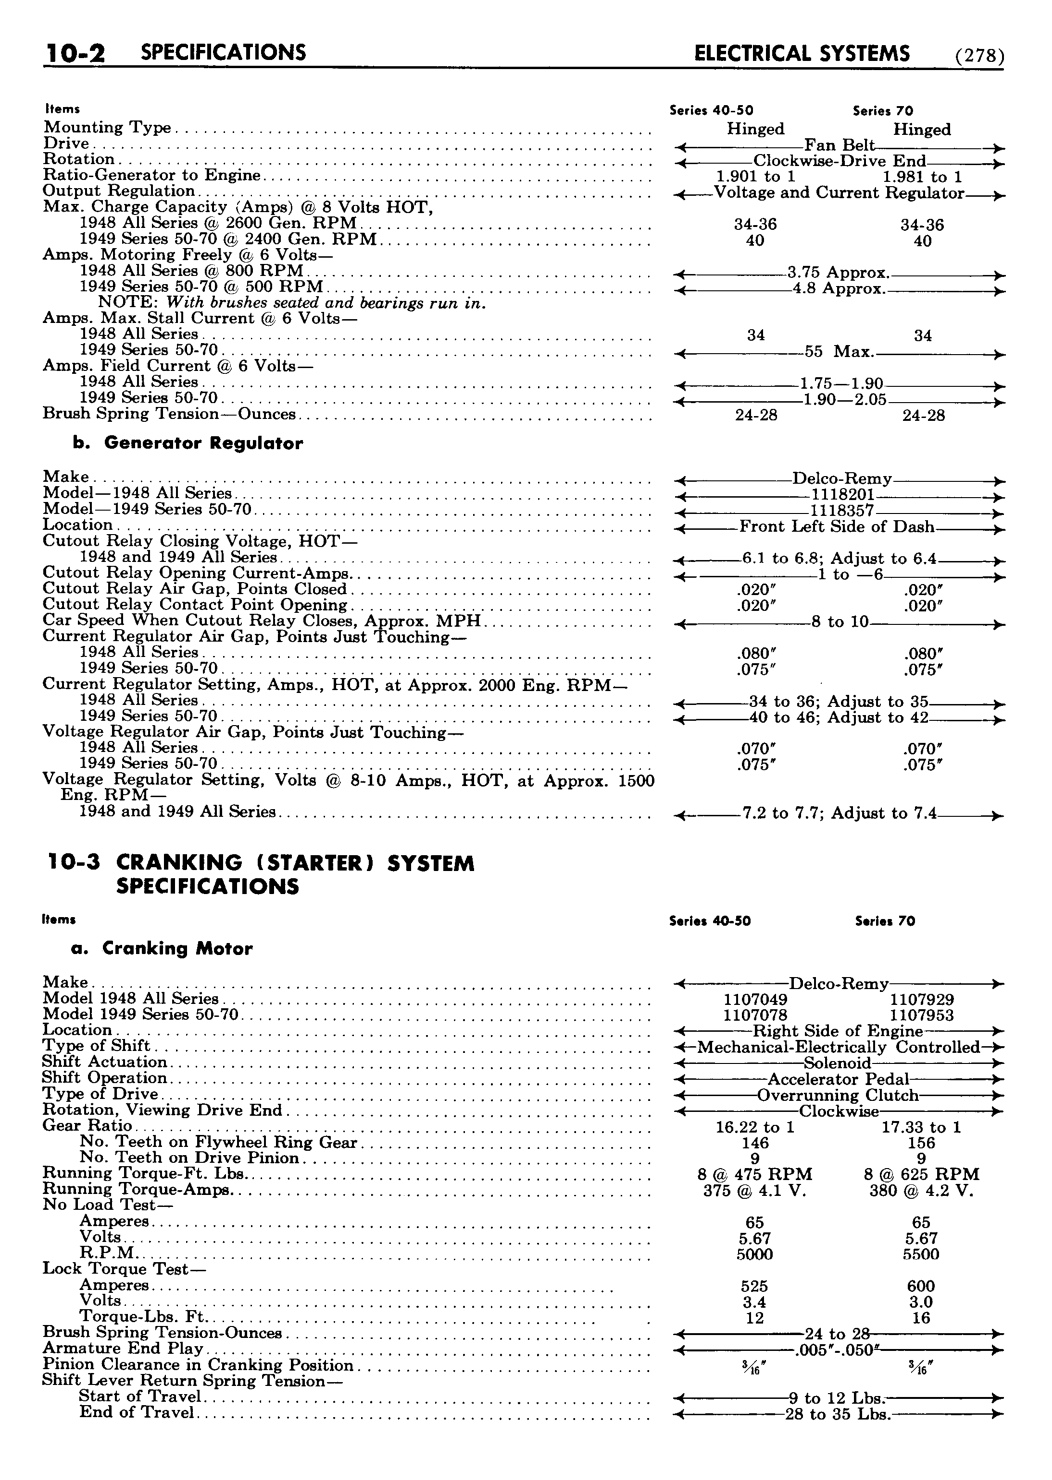 n_11 1948 Buick Shop Manual - Electrical Systems-002-002.jpg